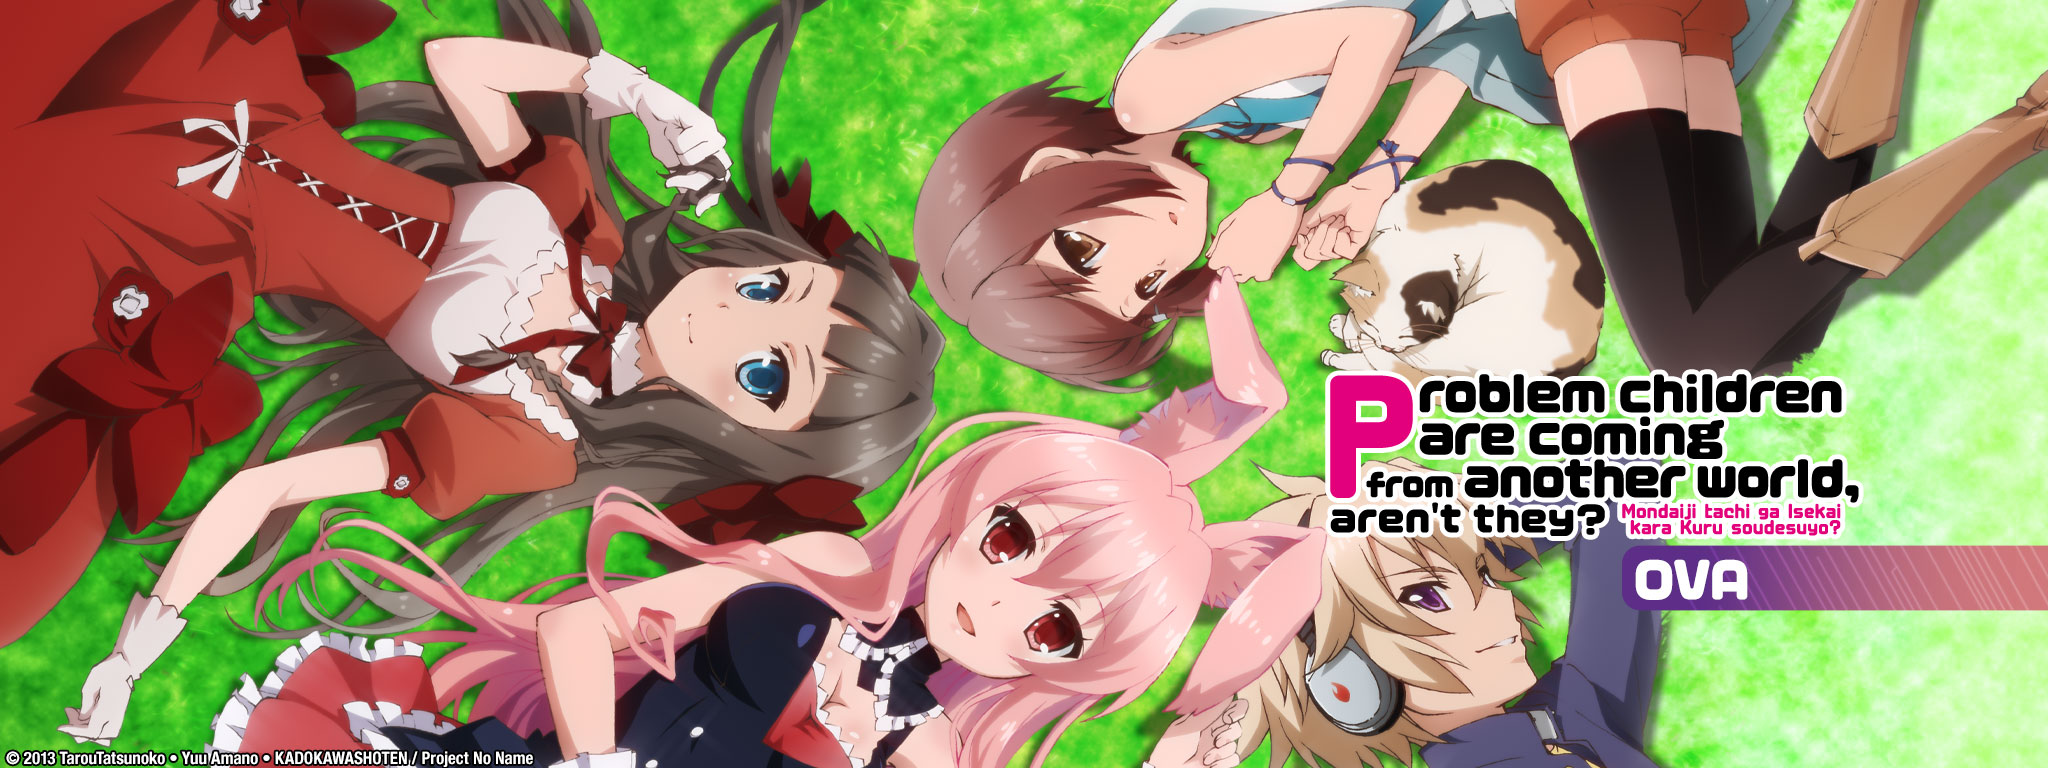 Title Art for Problem children are coming from another world, aren't they? OVA